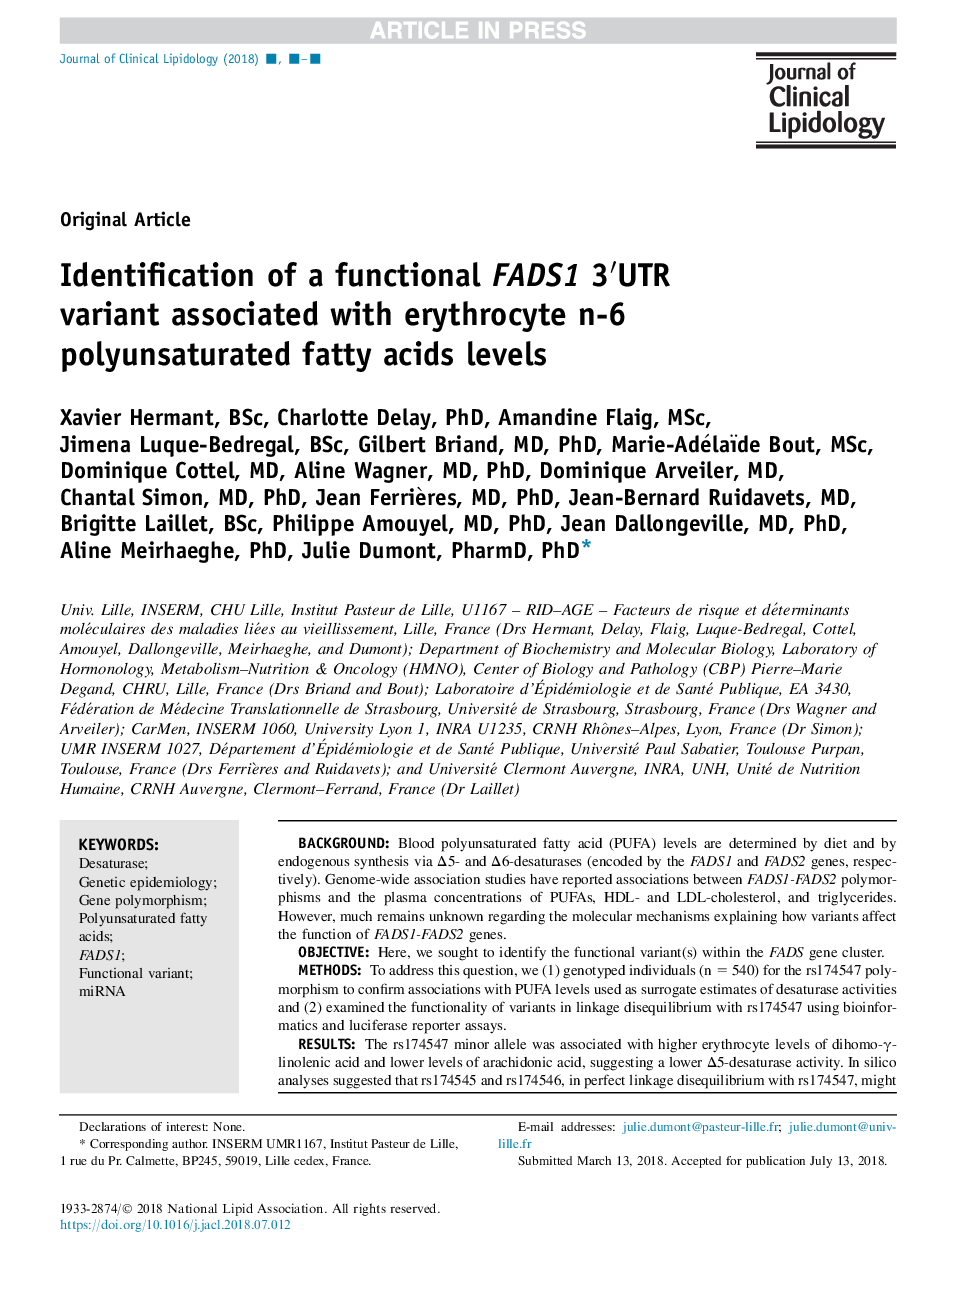 Identification of a functional FADS1 3â²UTR variant associated with erythrocyte n-6 polyunsaturated fatty acids levels